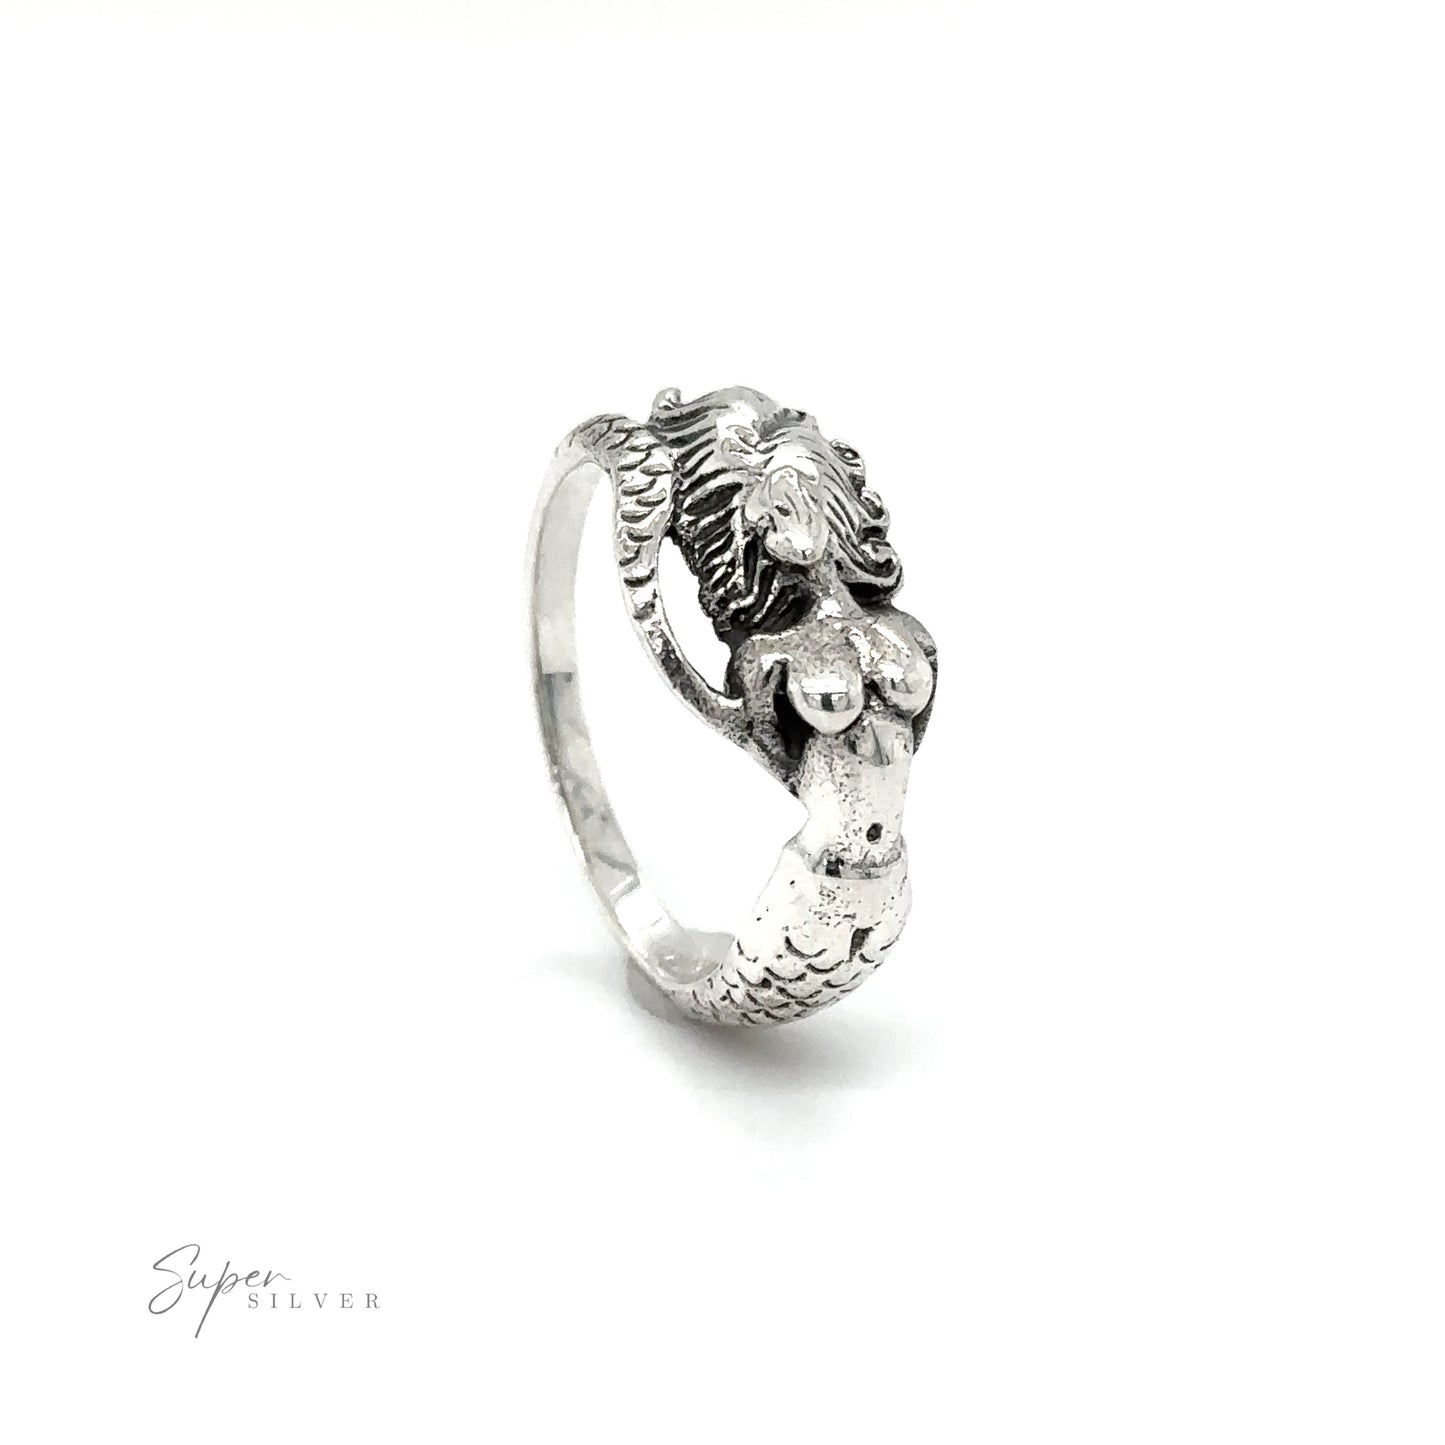 A Mermaid Ring with Swirly Tail with a lion on it.